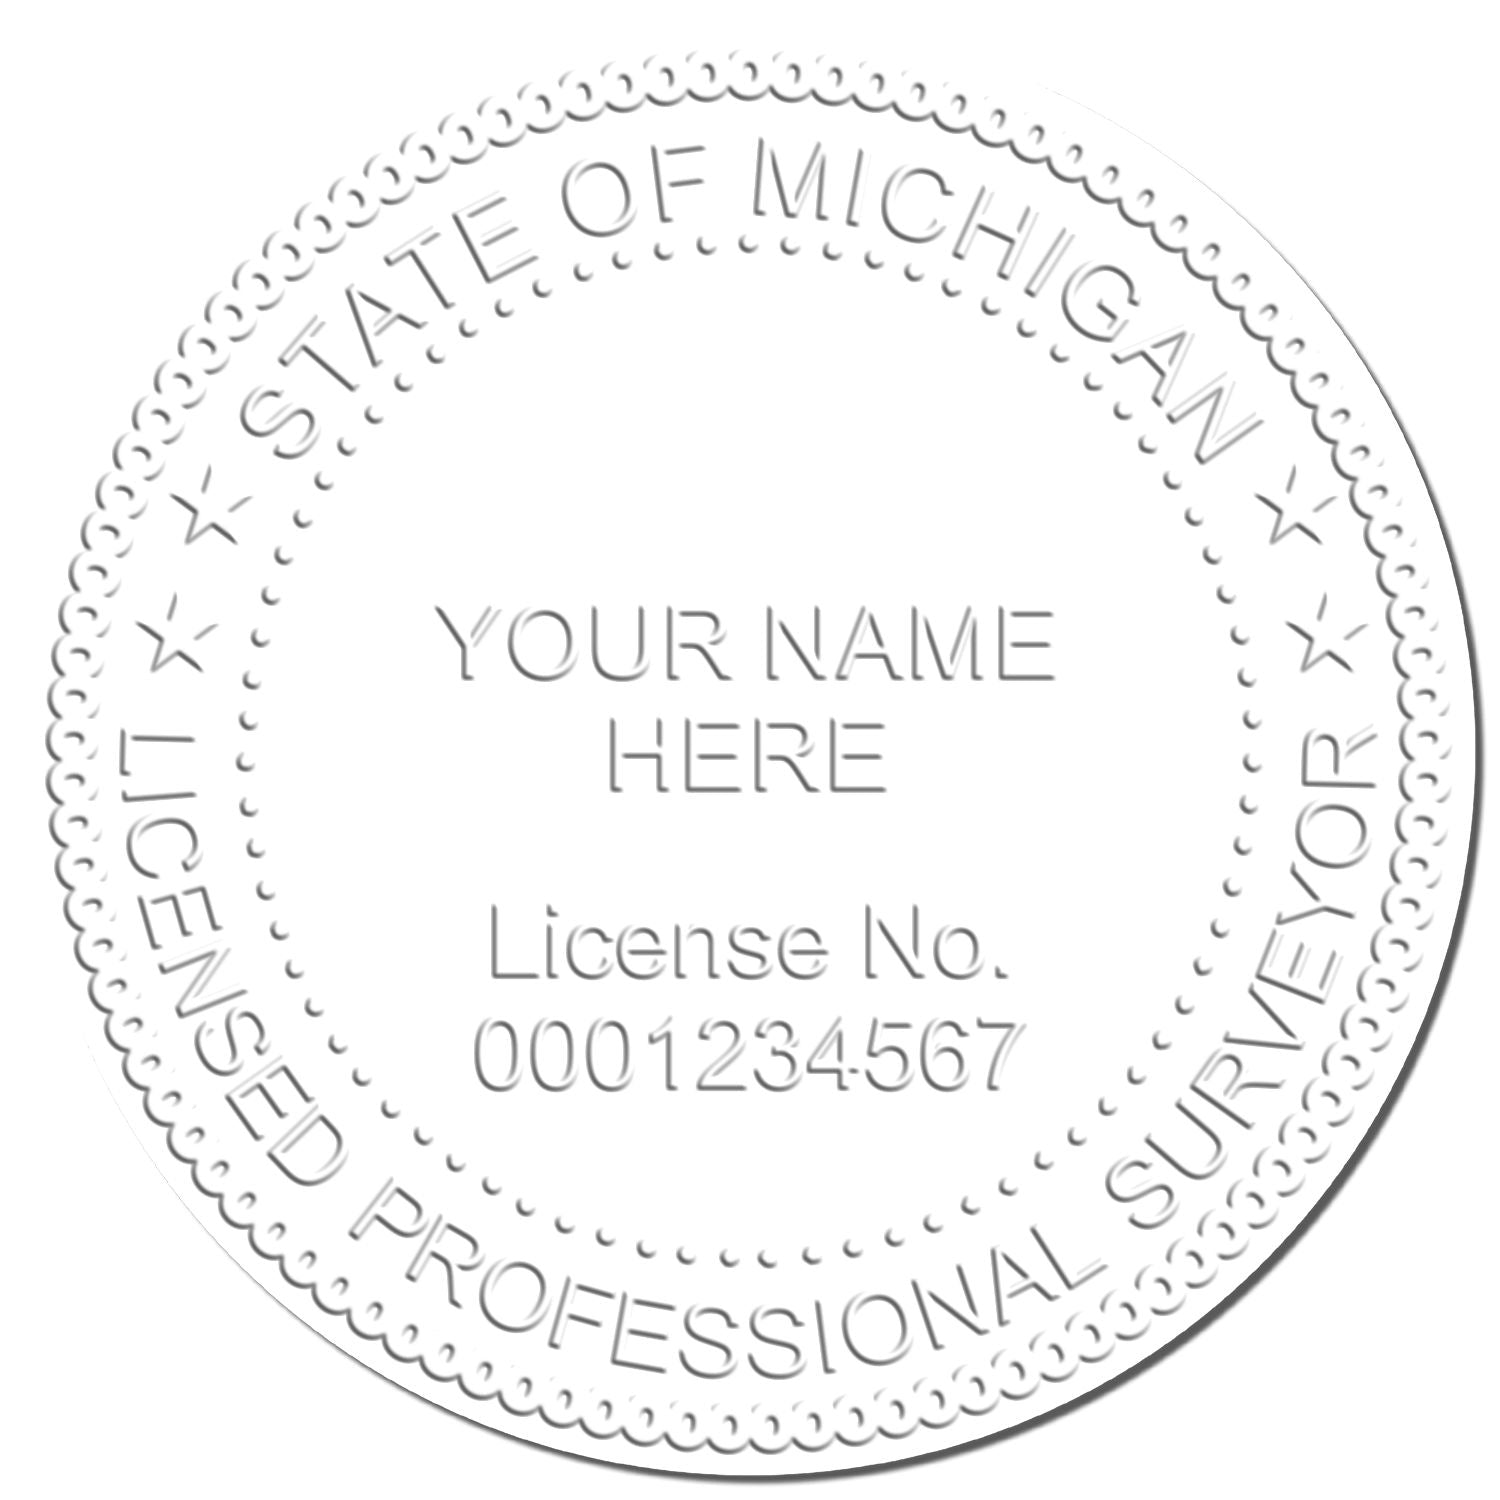 This paper is stamped with a sample imprint of the Long Reach Michigan Land Surveyor Seal, signifying its quality and reliability.